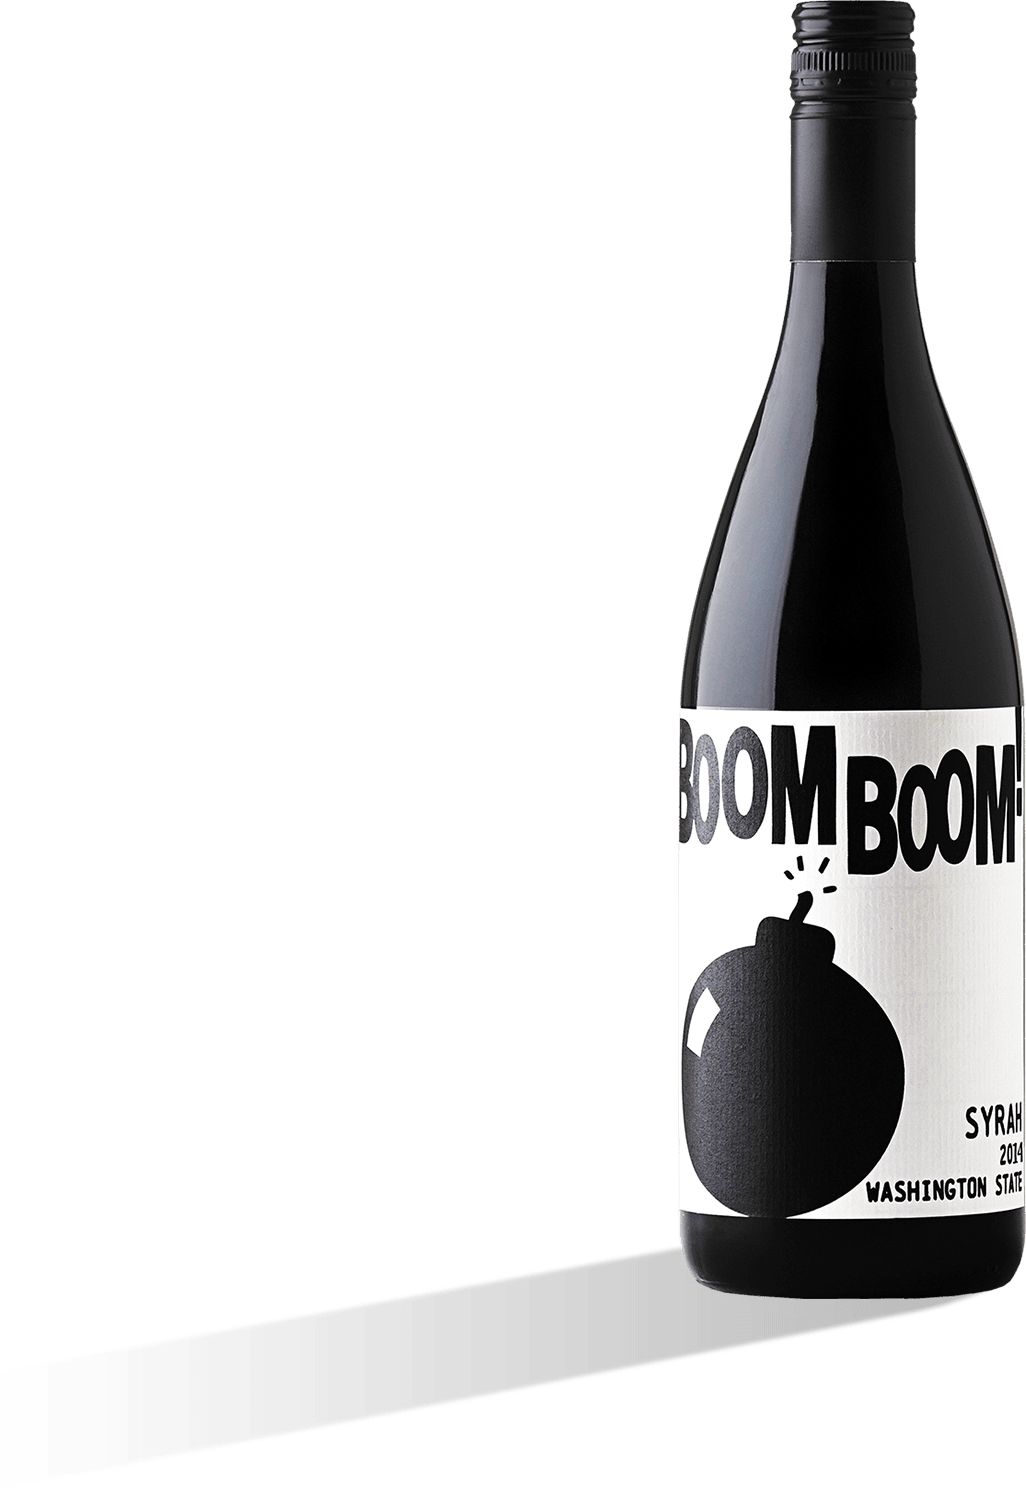 Boom Boom is a spicy Syrah by Charles Smith Wines from Washington State